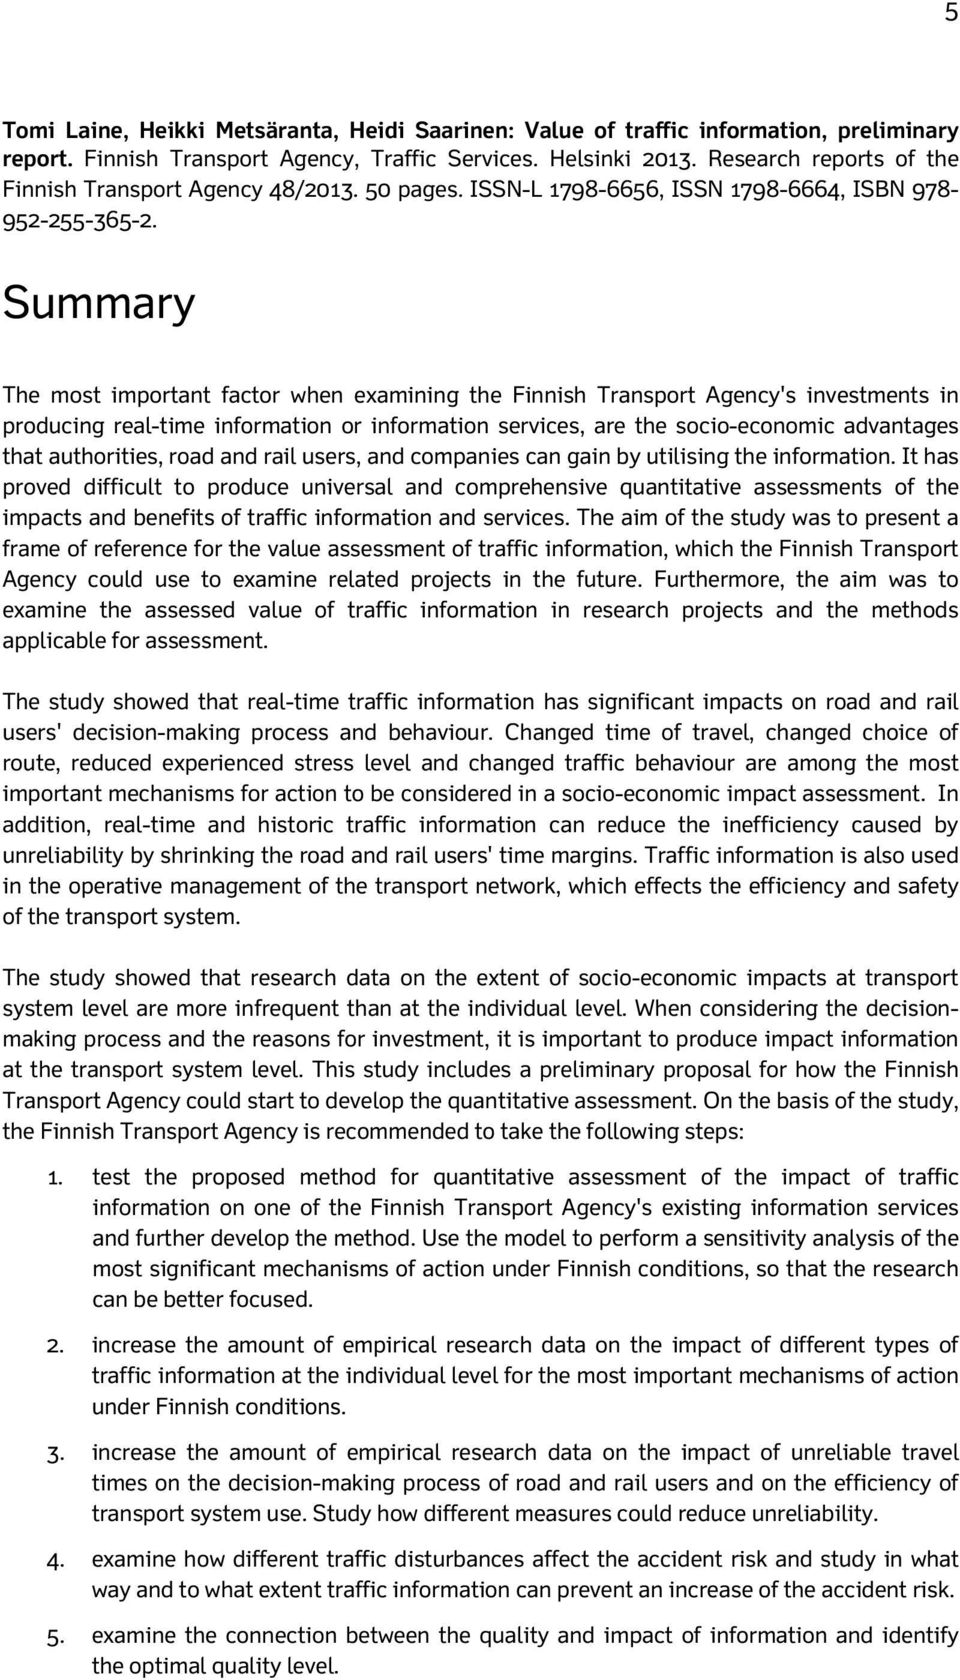 Summary The most important factor when examining the Finnish Transport Agency's investments in producing real-time information or information services, are the socio-economic advantages that